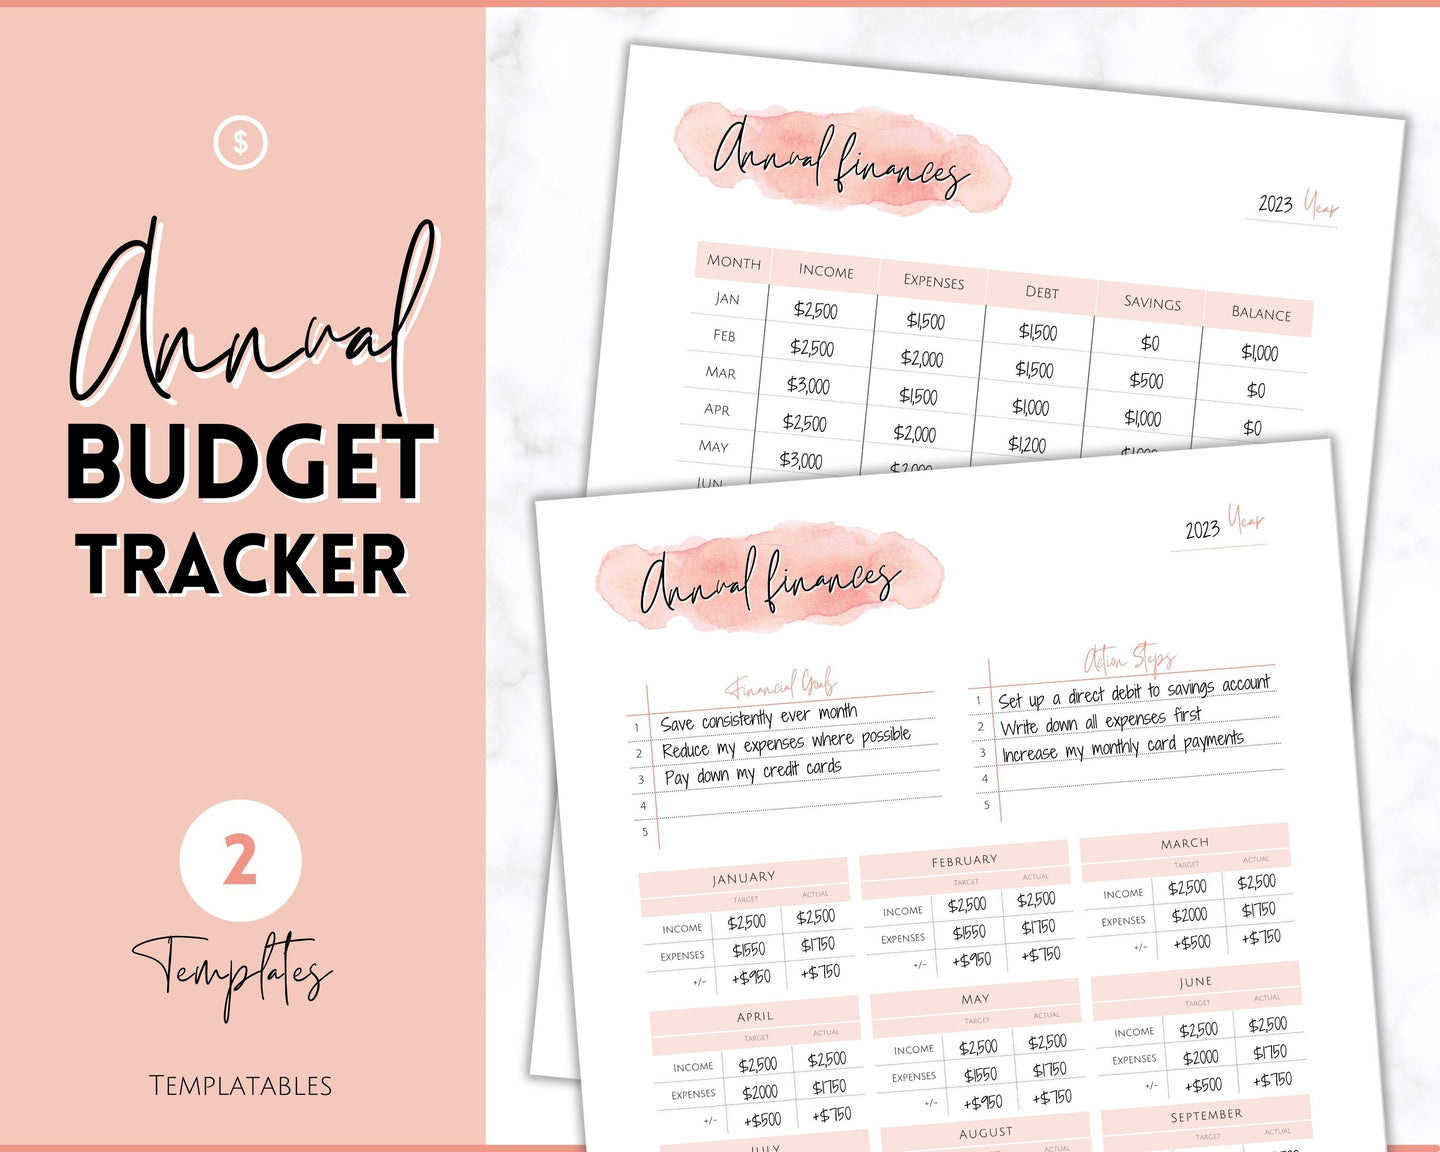 Annual Budget Tracker | Bill, Expenses, Income & Savings Tracker | Pink Watercolor